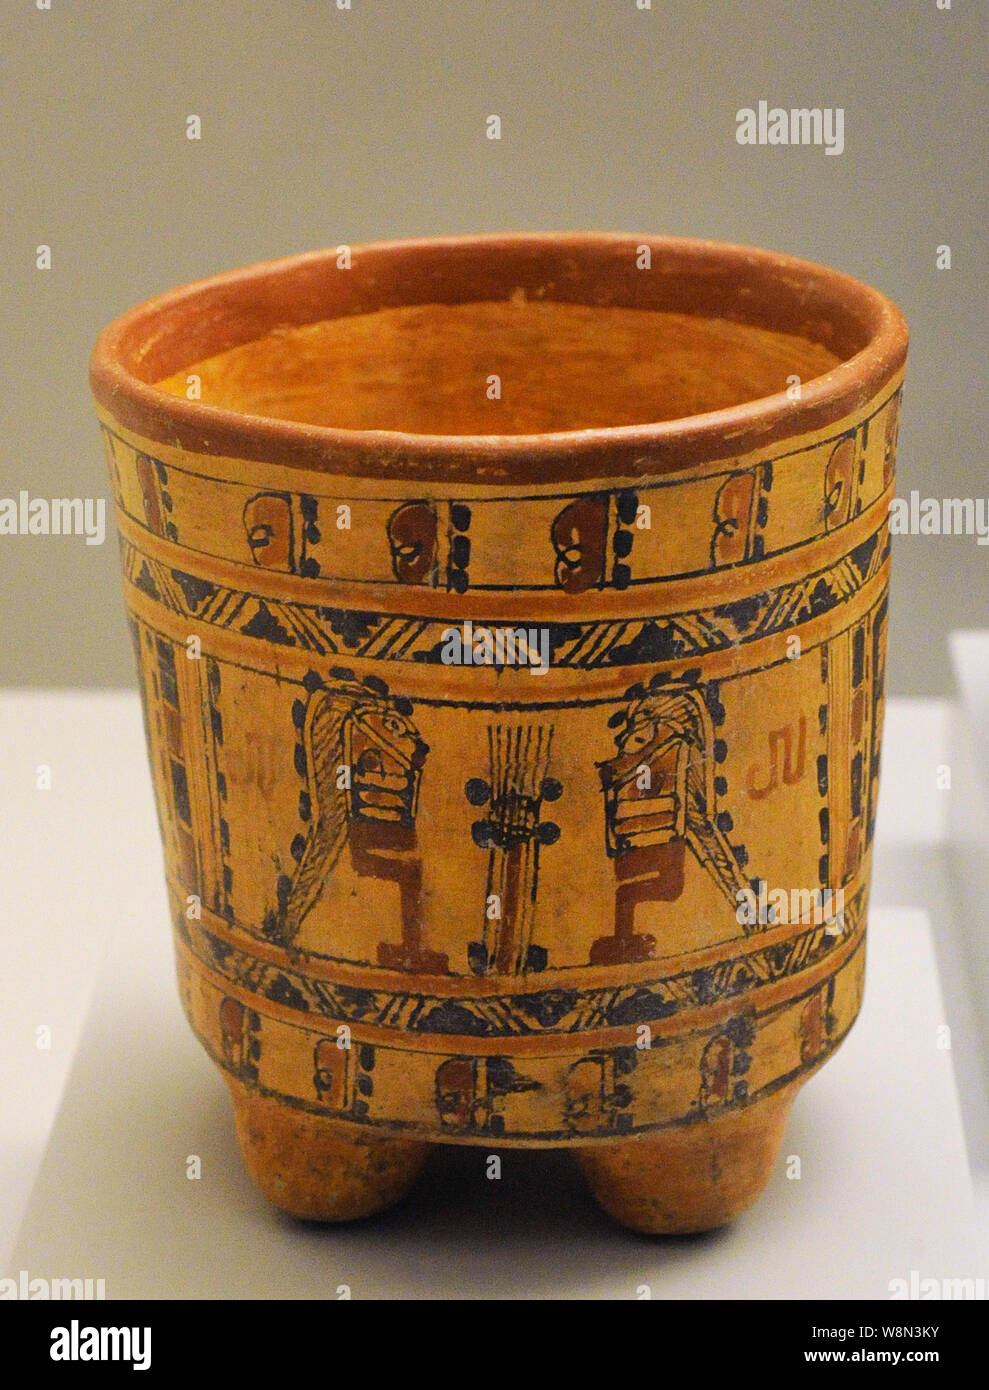 Vase decorated with courtly scenes. Painted ceramics. Maya culture. Late Classic Period (600-900 AD). Mesoamerica. Maya region. Museum of the Americas. Madrid, Spain. Stock Photo